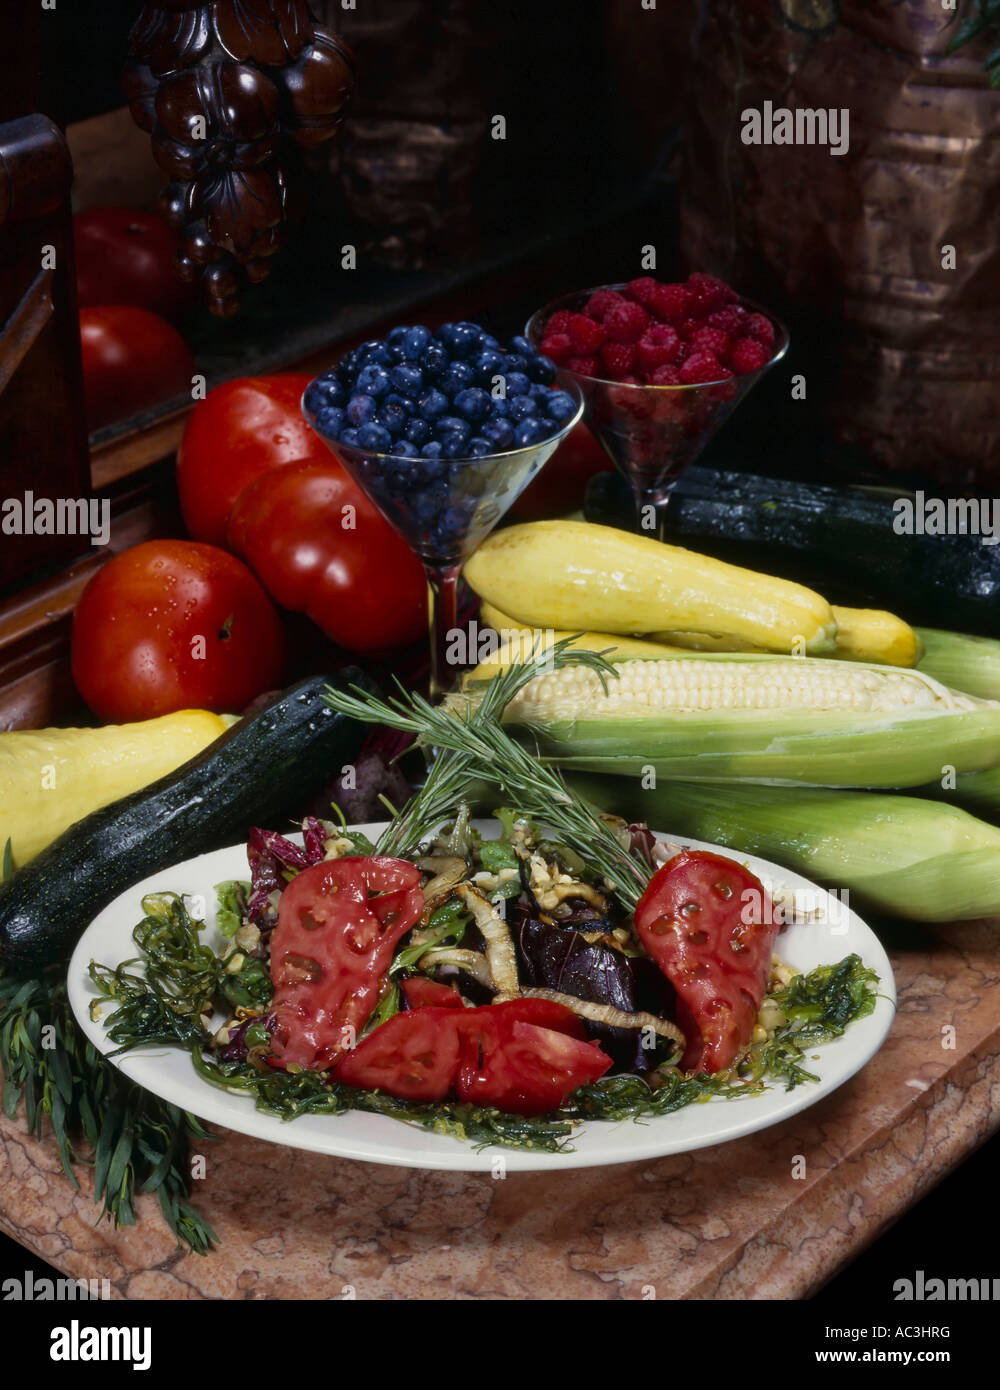 farm to table meal Stock Photo